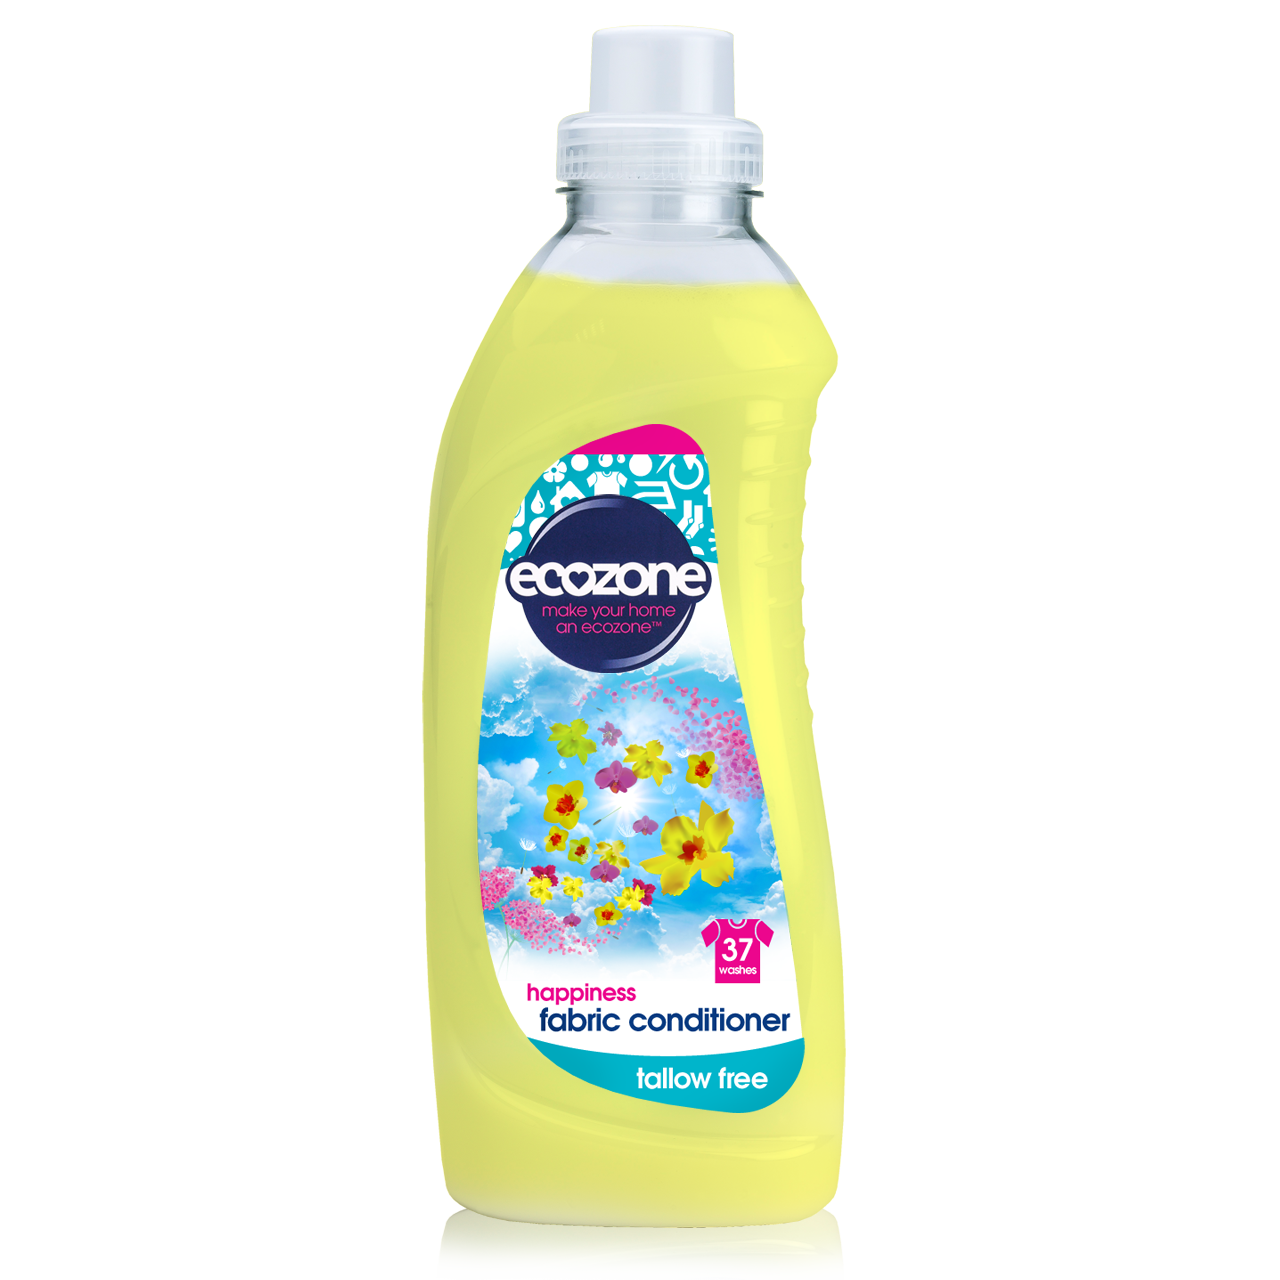 Ecozone Fabric Conditioner Happiness 1 litre - Just Natural